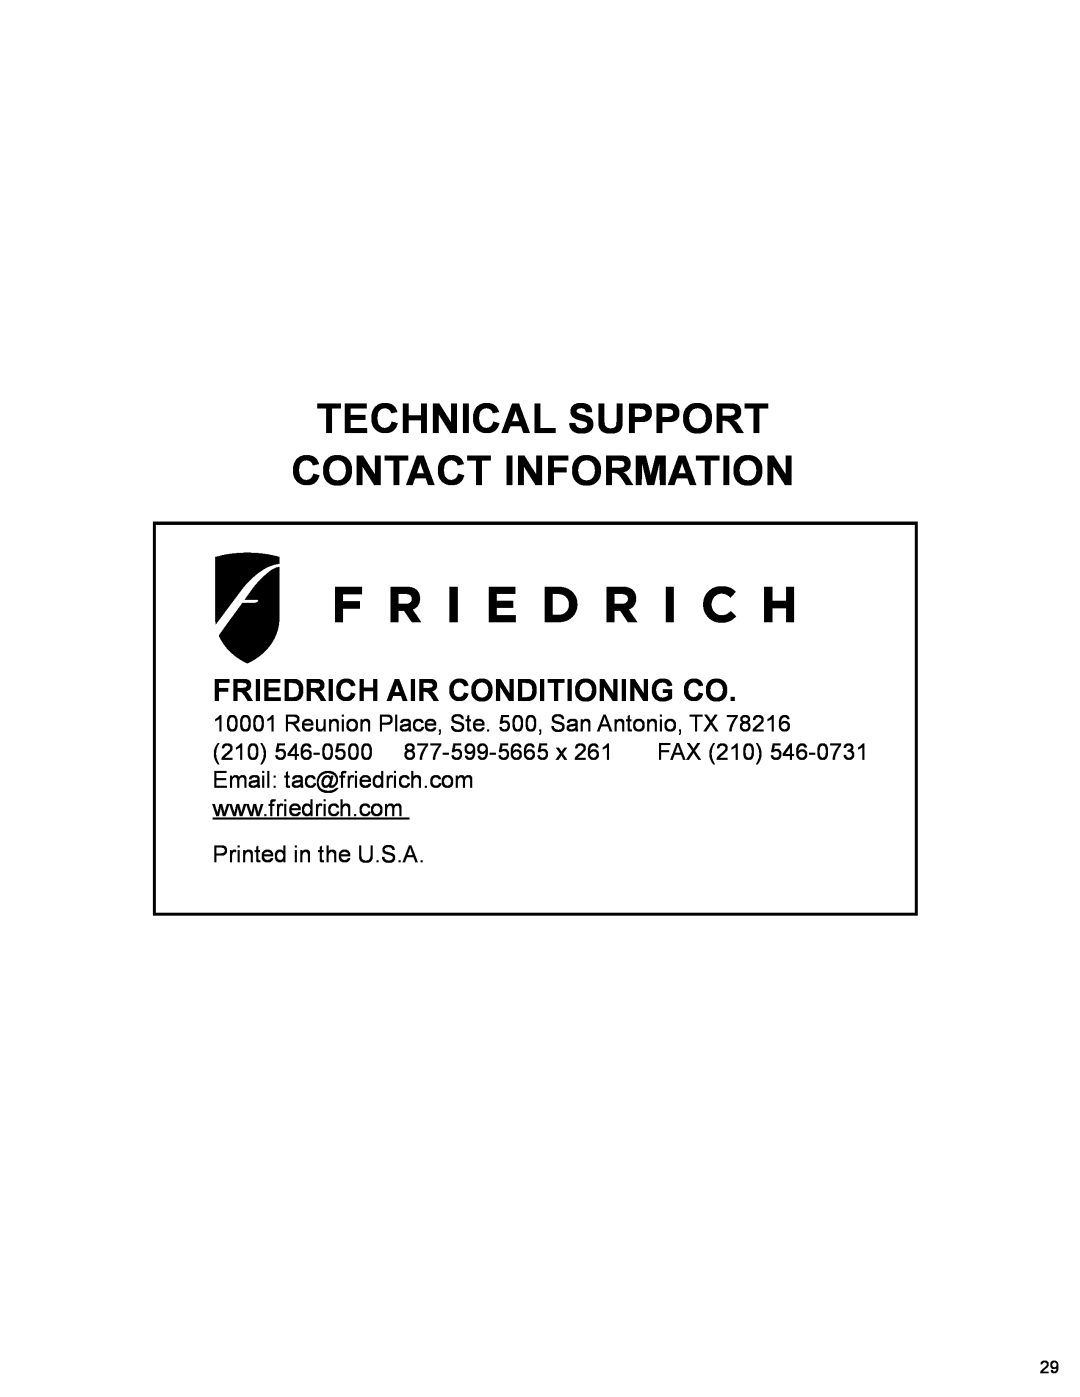 Friedrich R-410A service manual Technical Support Contact Information, Friedrich Air Conditioning Co 